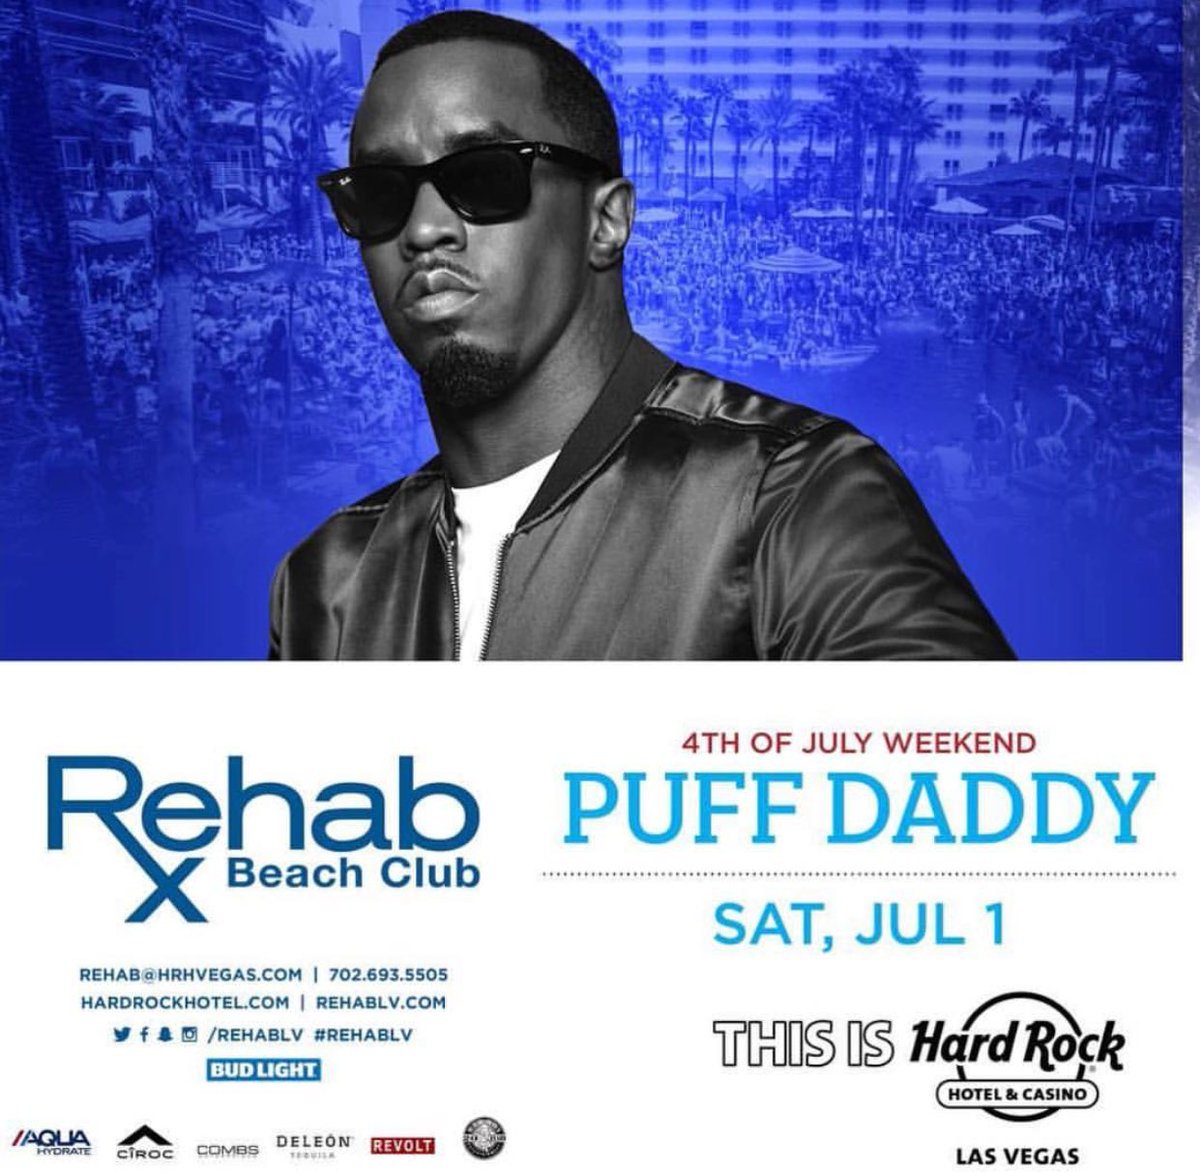 Vegas!! We're kicking off 4th of July weekend at @RehabLV!!! Ain't no party like a Diddy party!! Get there early!!! https://t.co/vYXoKkqAyY